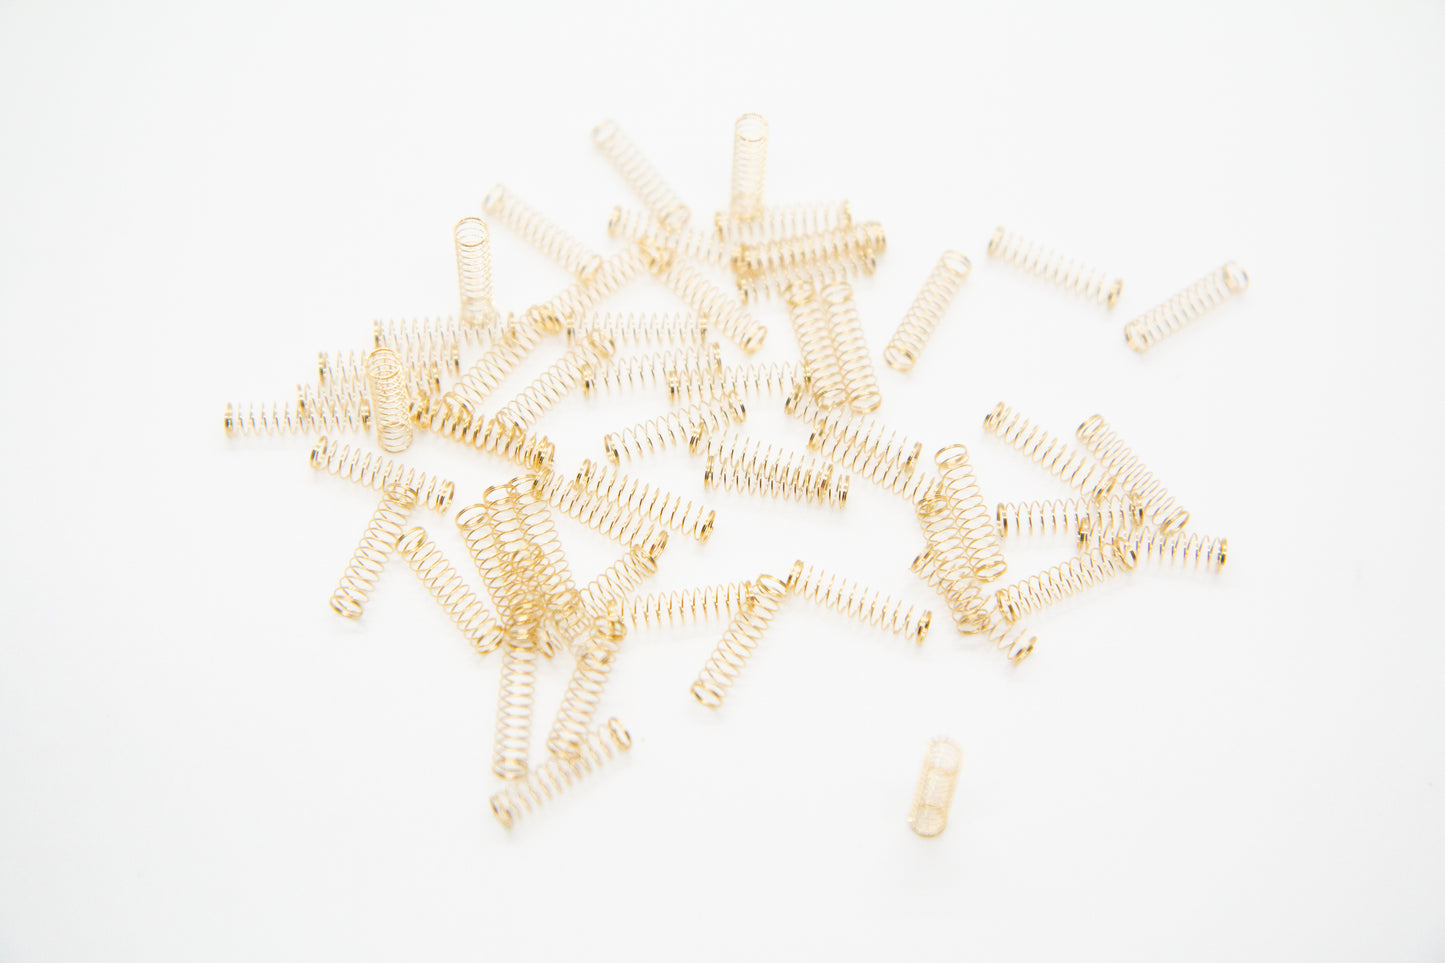 Close-up shot of a single 67g dual stage gold plated mechanical keyboard spring on a grey background